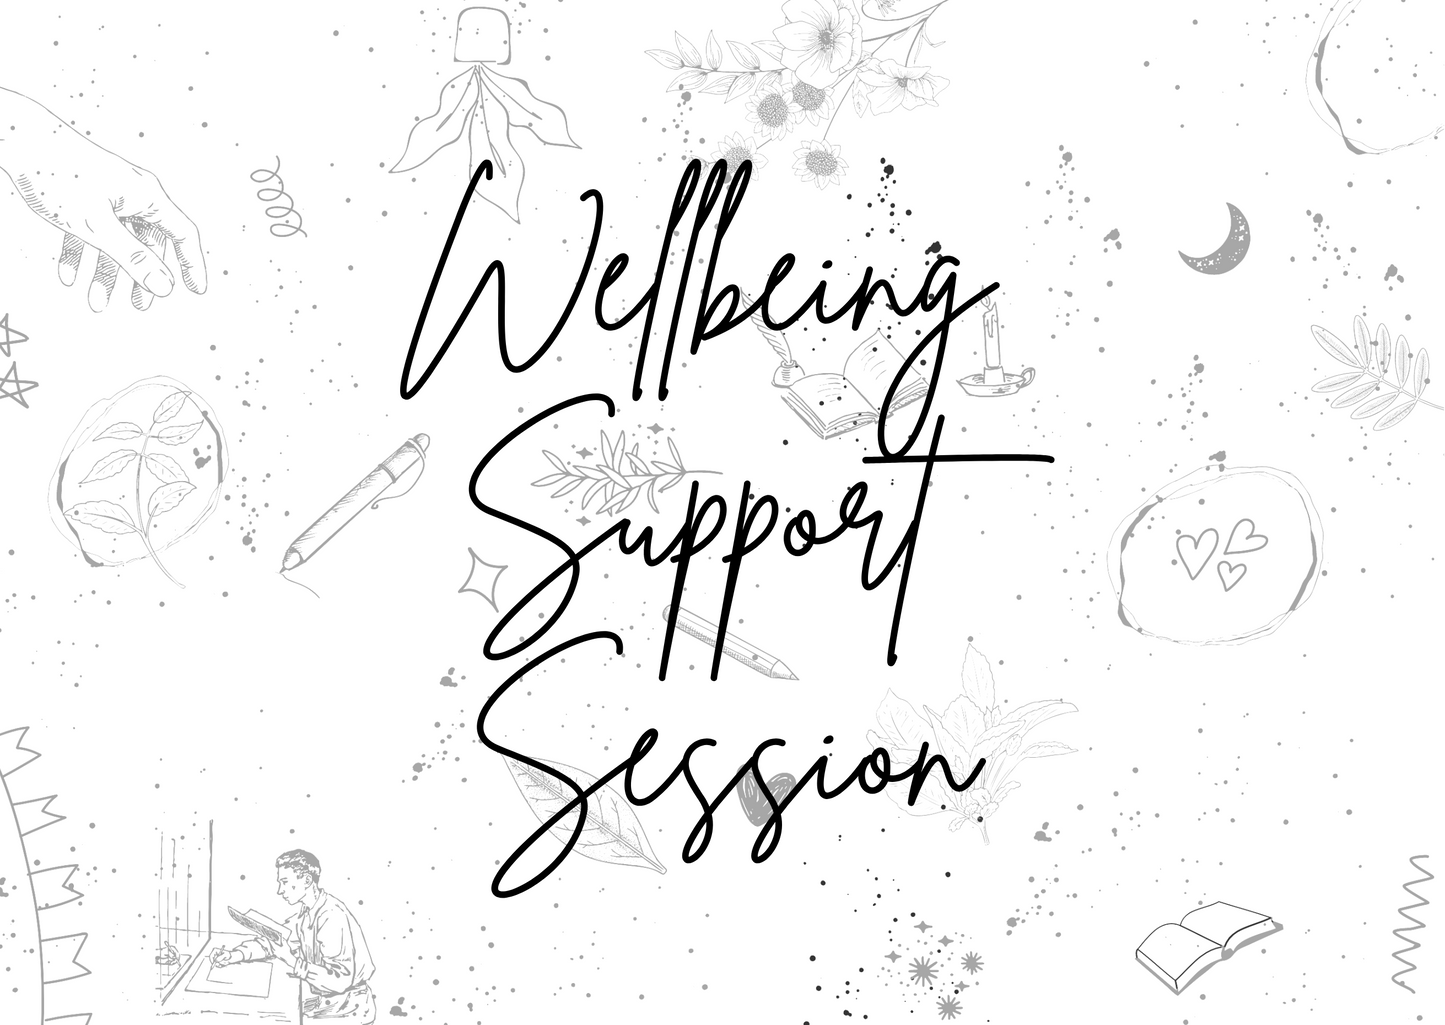 Virtual Wellbeing Support Session